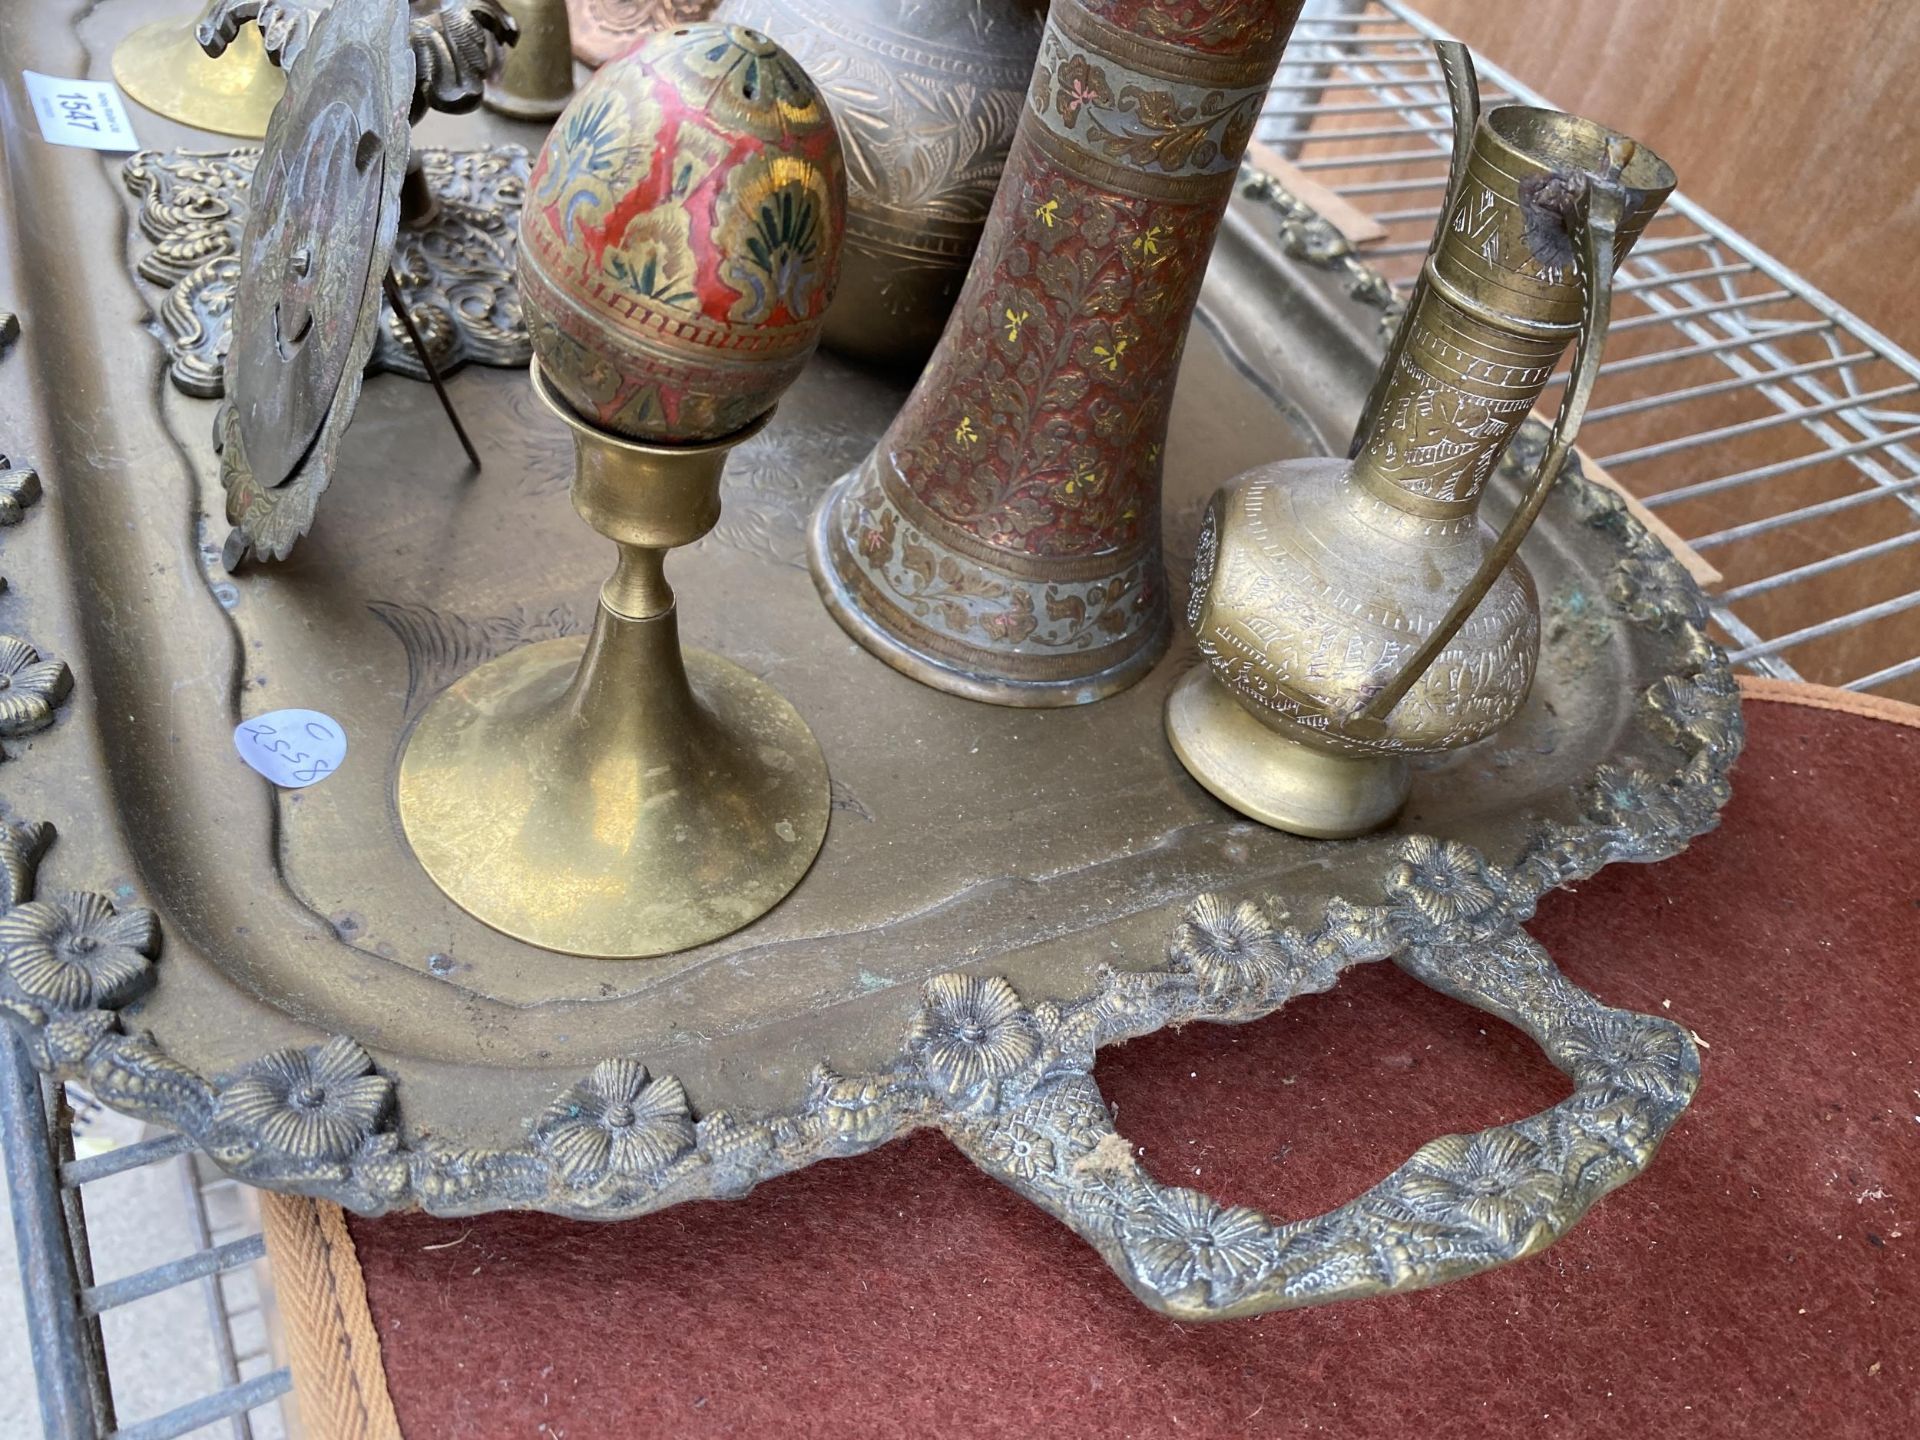 AN ASSORTMENT OF VINTAGE AND DECORATIVE BRASS WARE TO INCLUDE A TRAY, CANDLESTICKS AND CLOISONNE - Image 9 of 9